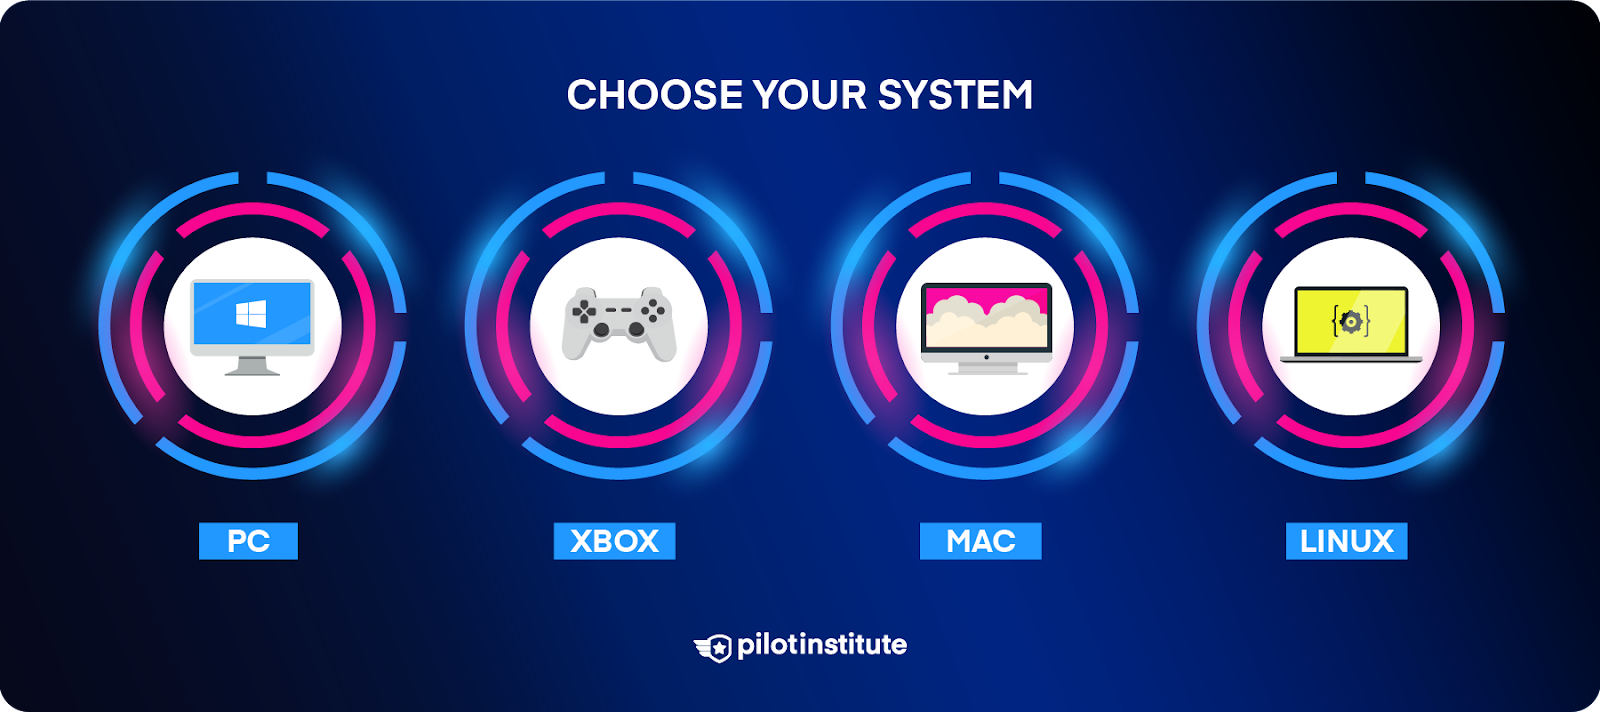 Infographic depicting PC, Xbox, Mac, and Linux systems.